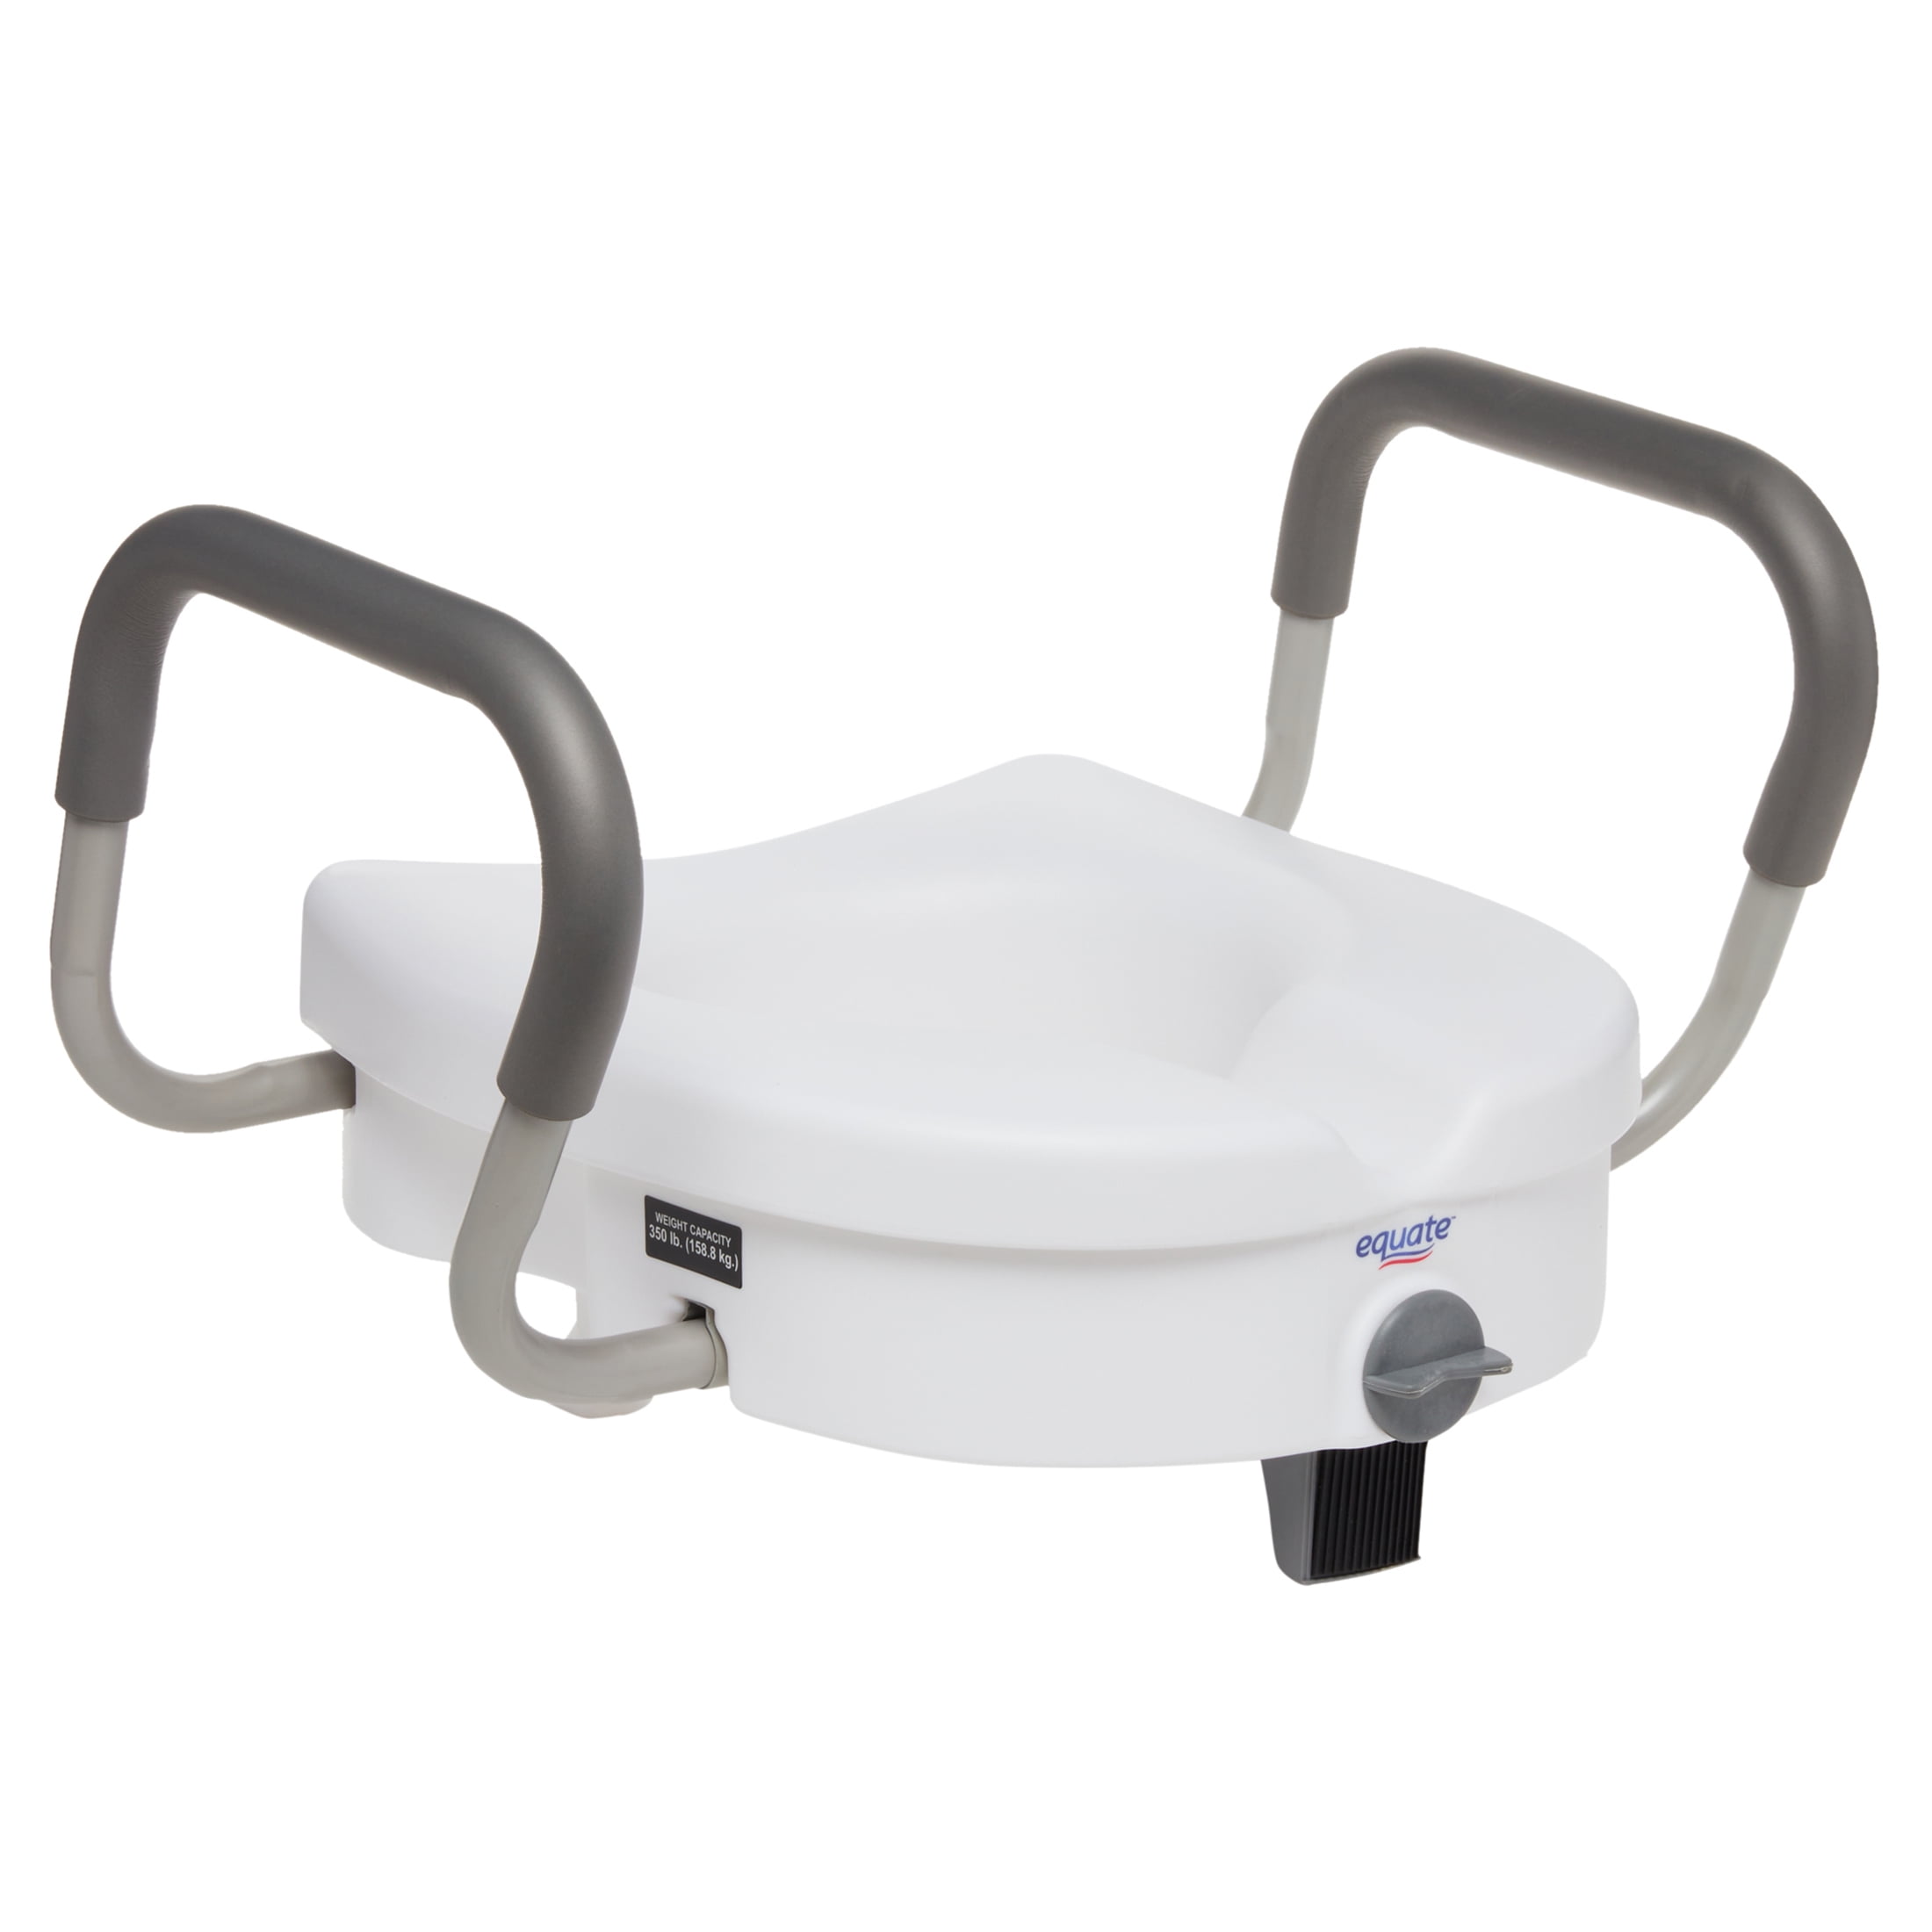 Equate Raised Toilet Seat With Handles, 5 Inch Toilet Seat Riser with Arms, Fits Most Toilets, Elongated or Round, Handicap Toilet Seat With Handles, Handicap Toilet Seat